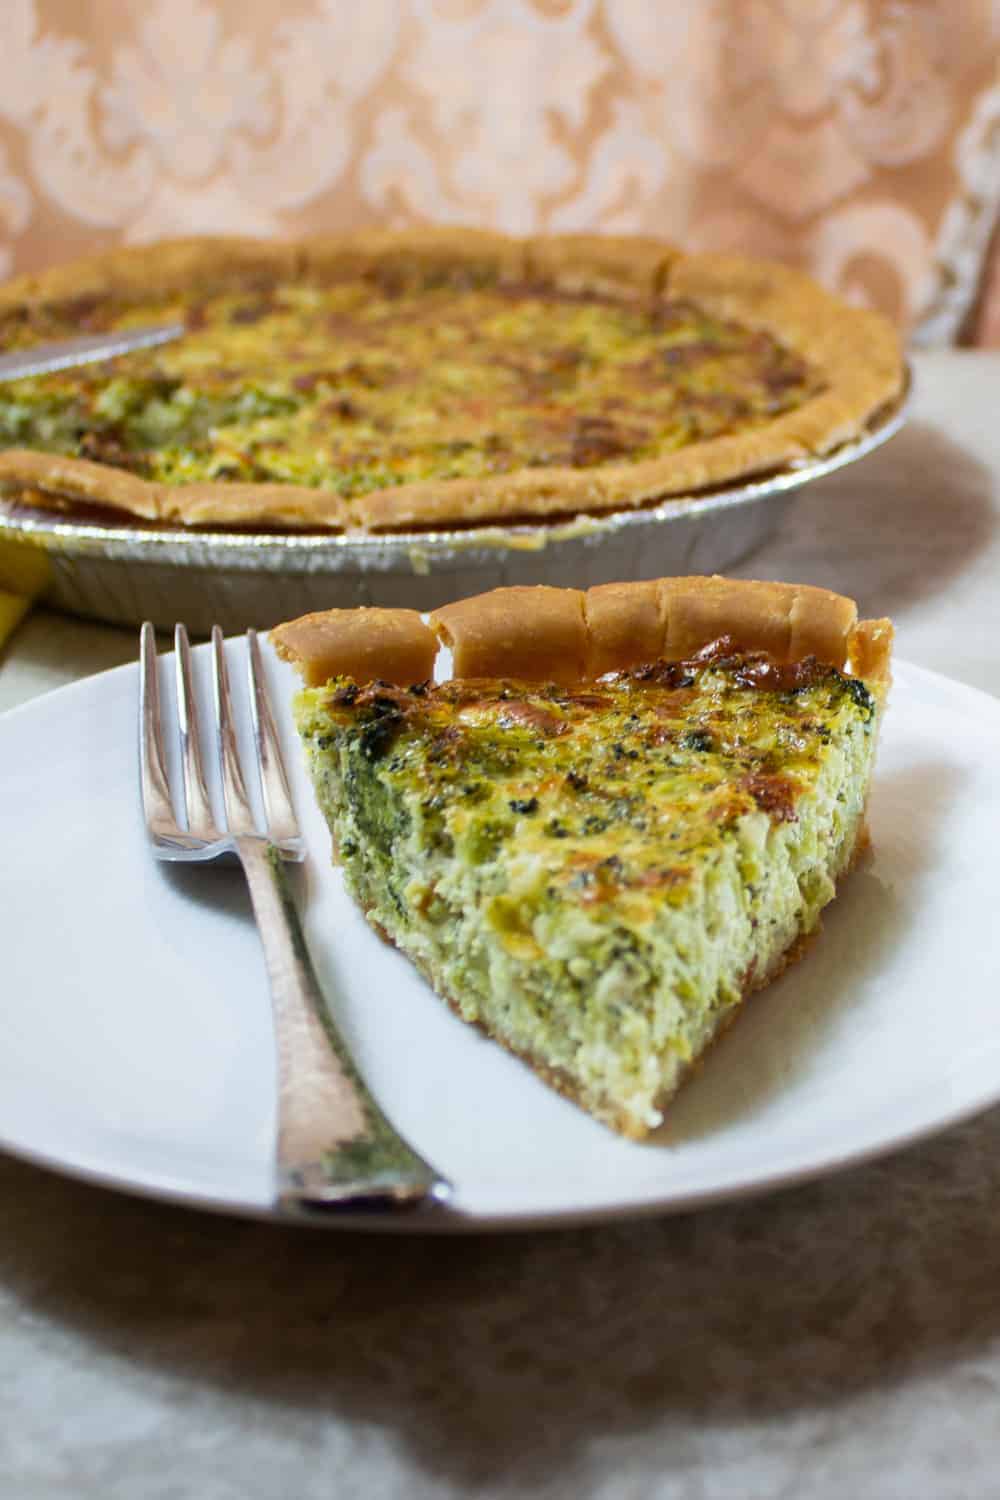 5 Different Ways to Eat Broccoli Cheddar Quiche